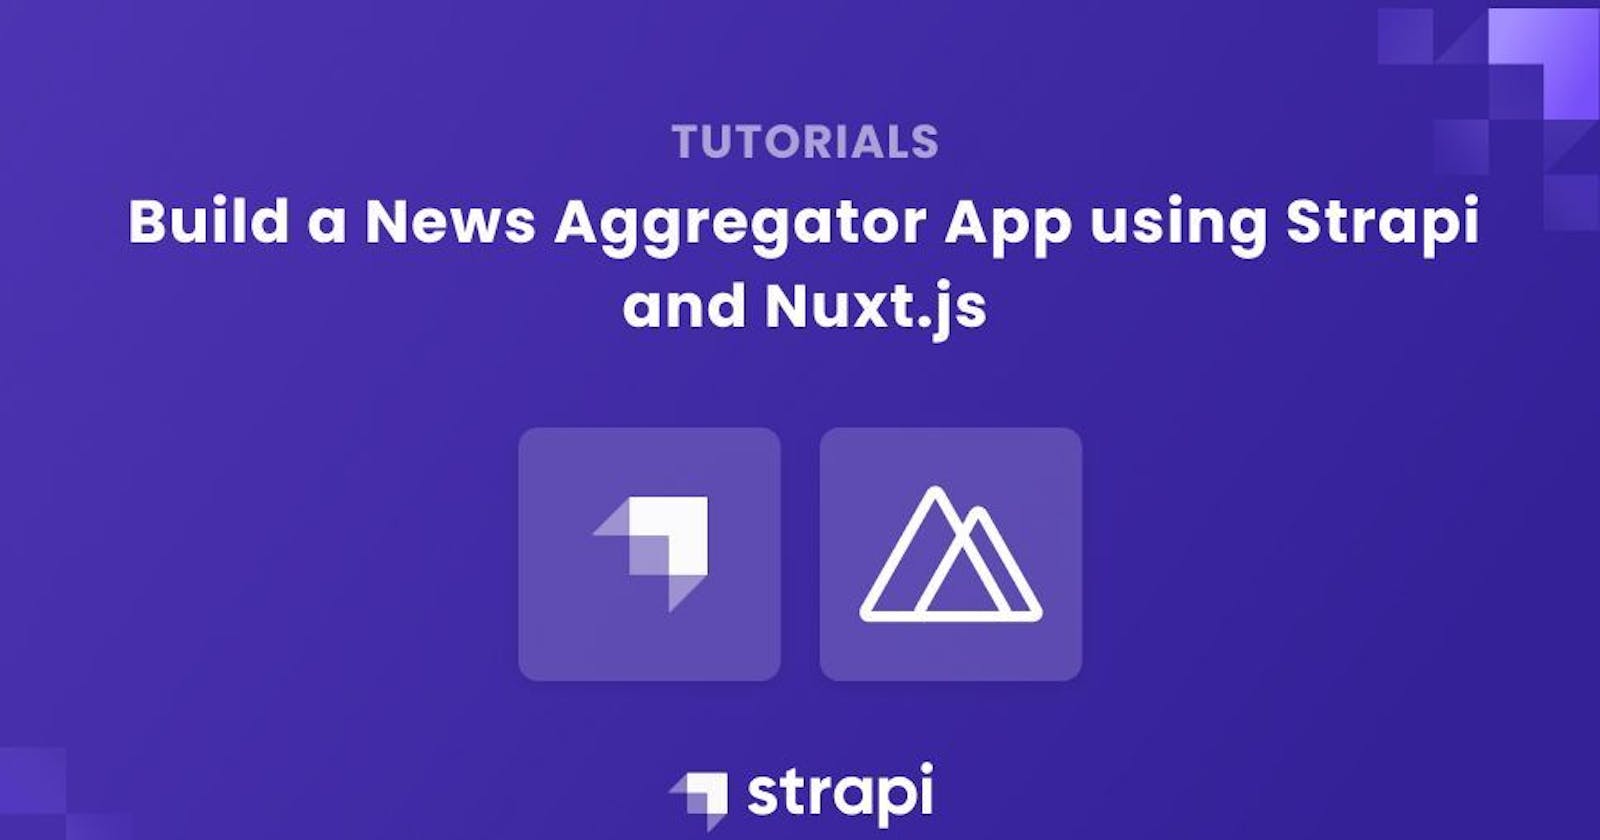 Building a News Aggregator App using Strapi and Nuxtjs